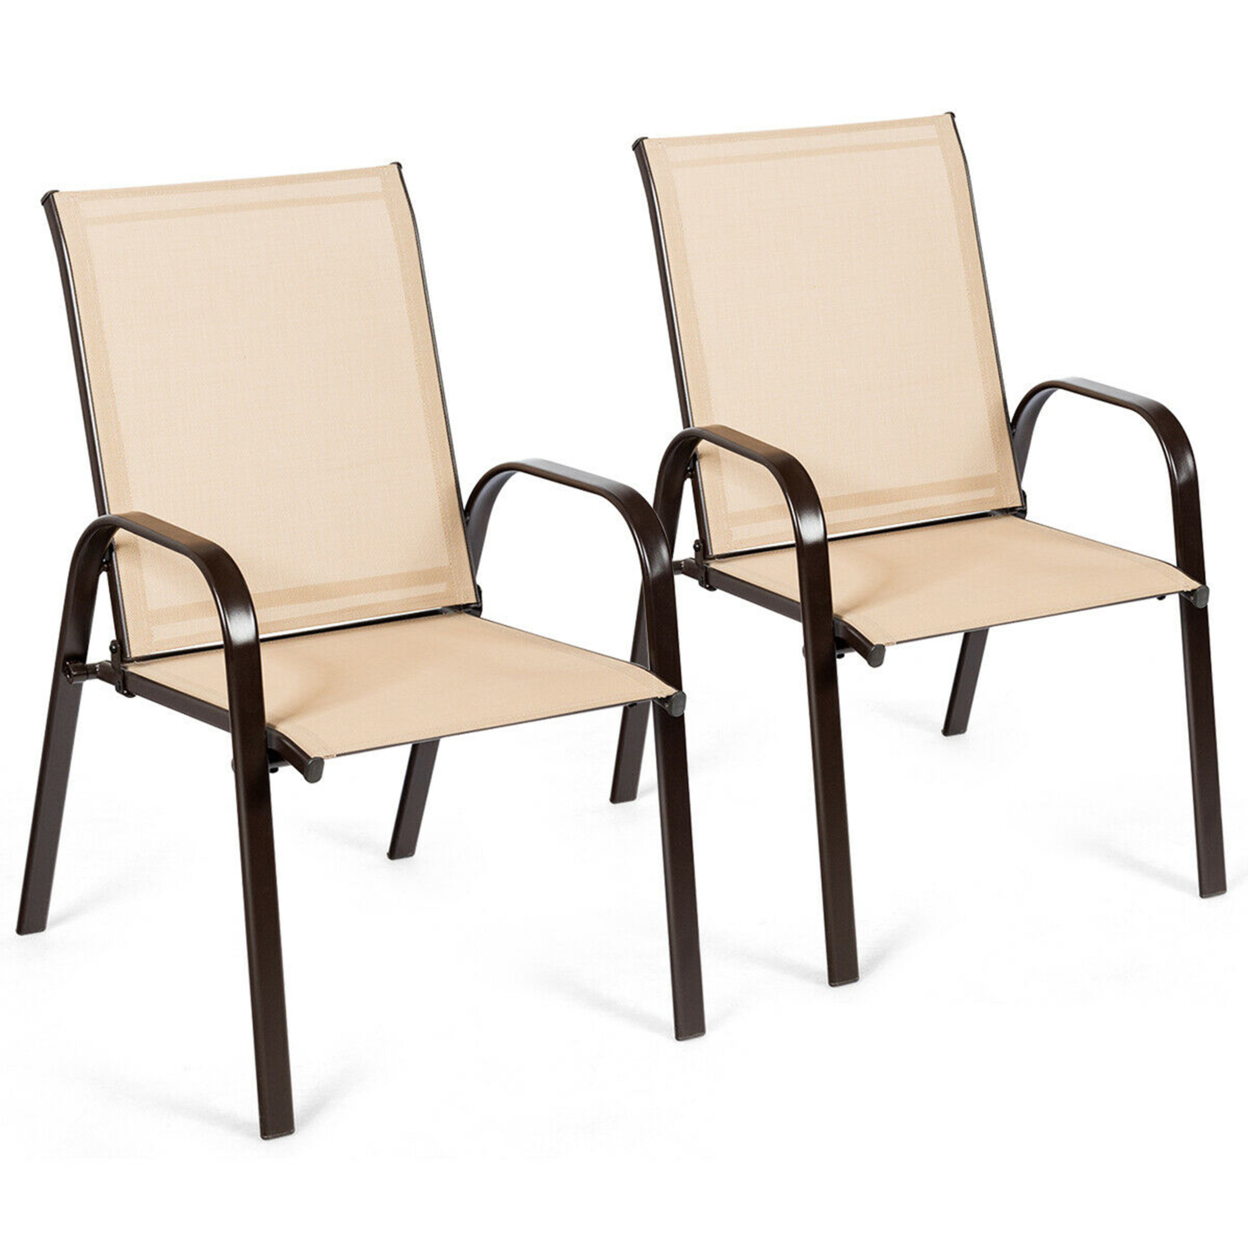 Gymax Set Of 2 Patio Chairs Dining Chairs Garden Outdoor W/ Armrest Steel Frame